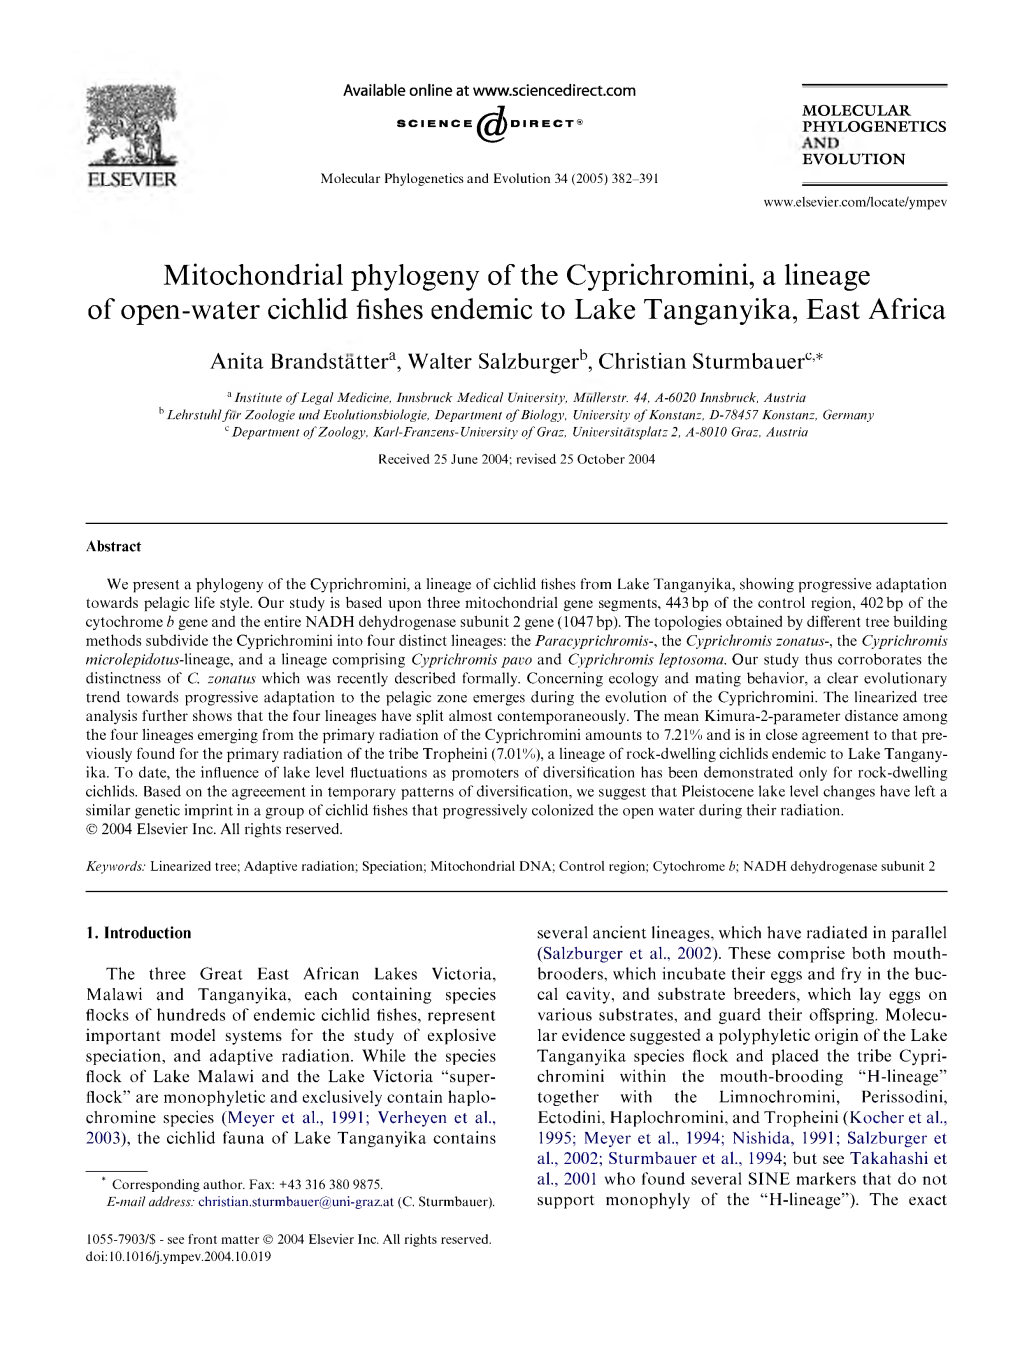 Mitochondrial Phylogeny of the Cyprichromini, a Lineage of Open-Water Cichlid Fishes Endemic to Lake Tanganyika, East Africa